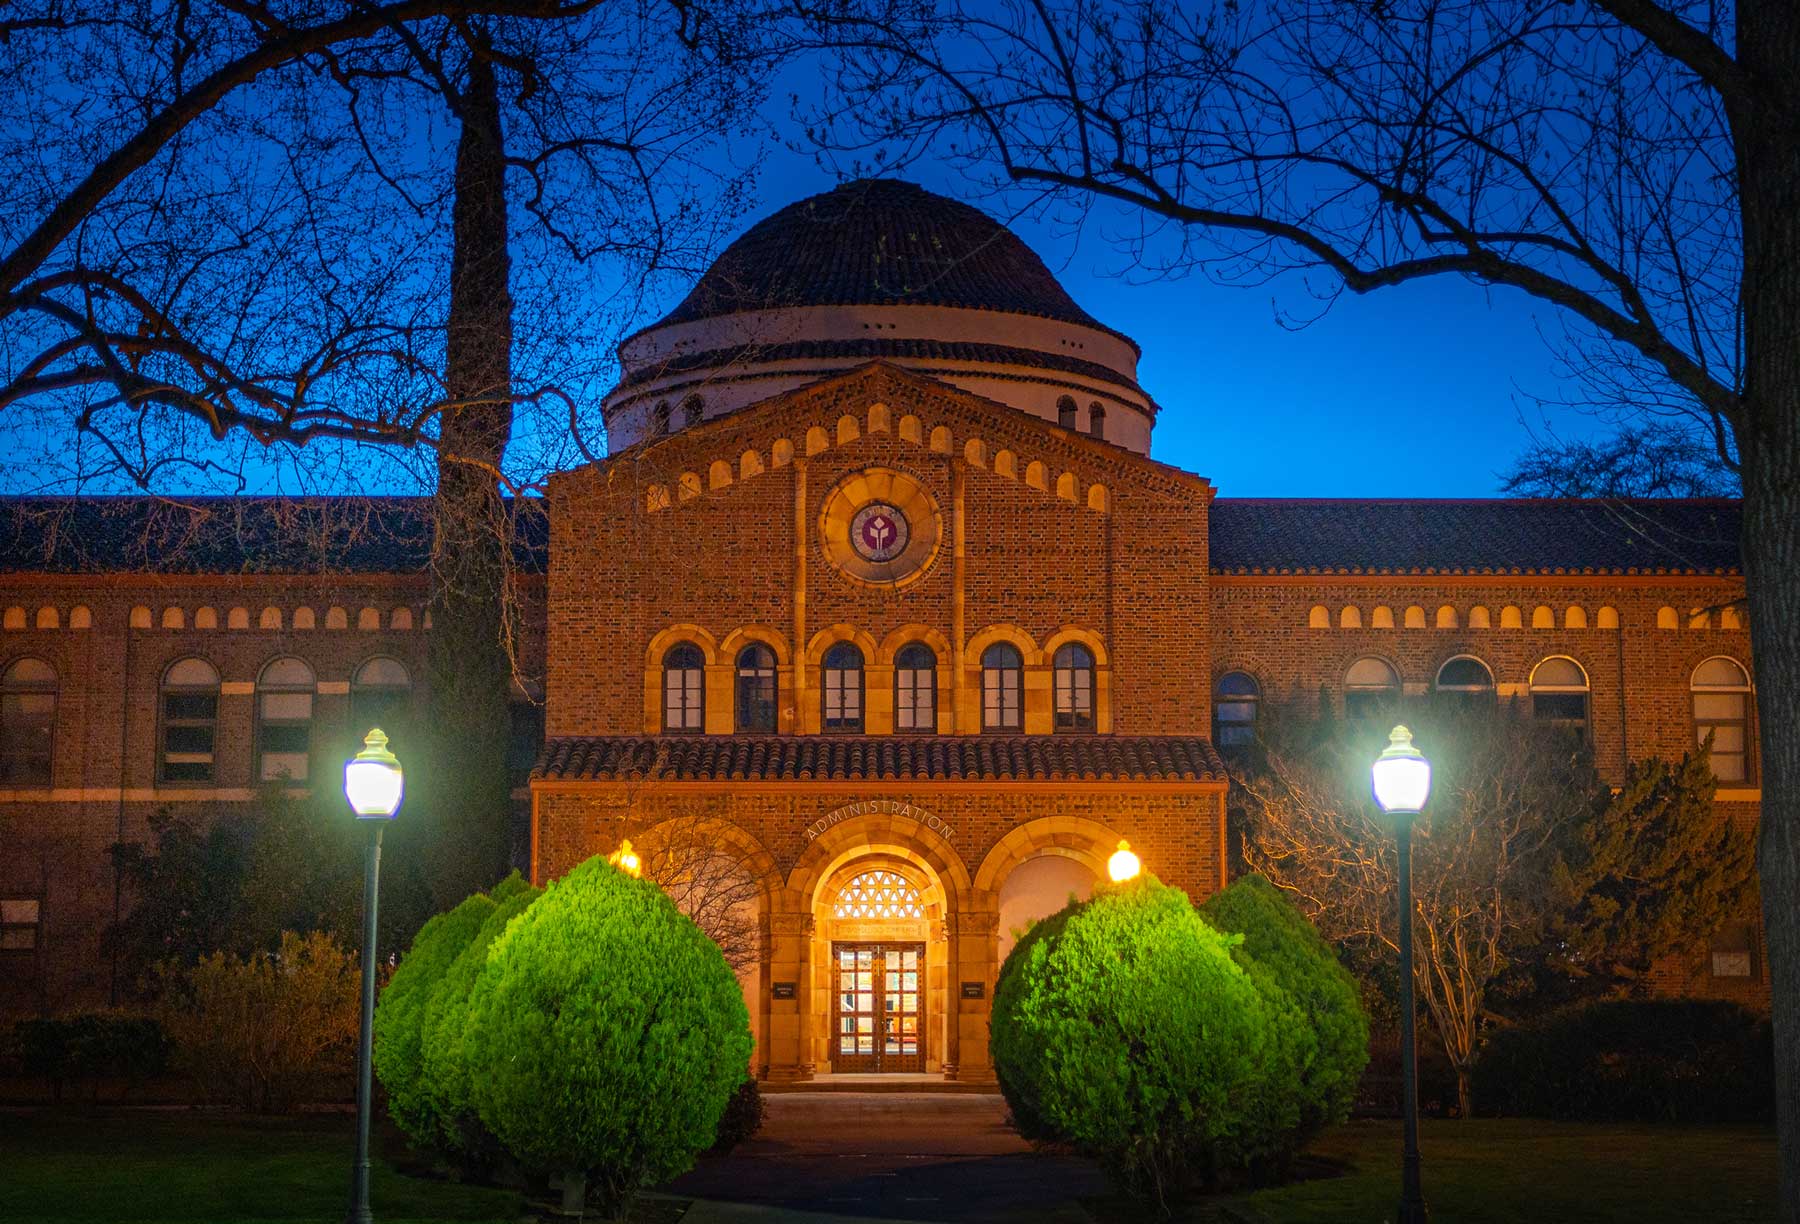 Kendall Hall is photographed at dusk, illuminated by soft lights against a cobalt blue sky.